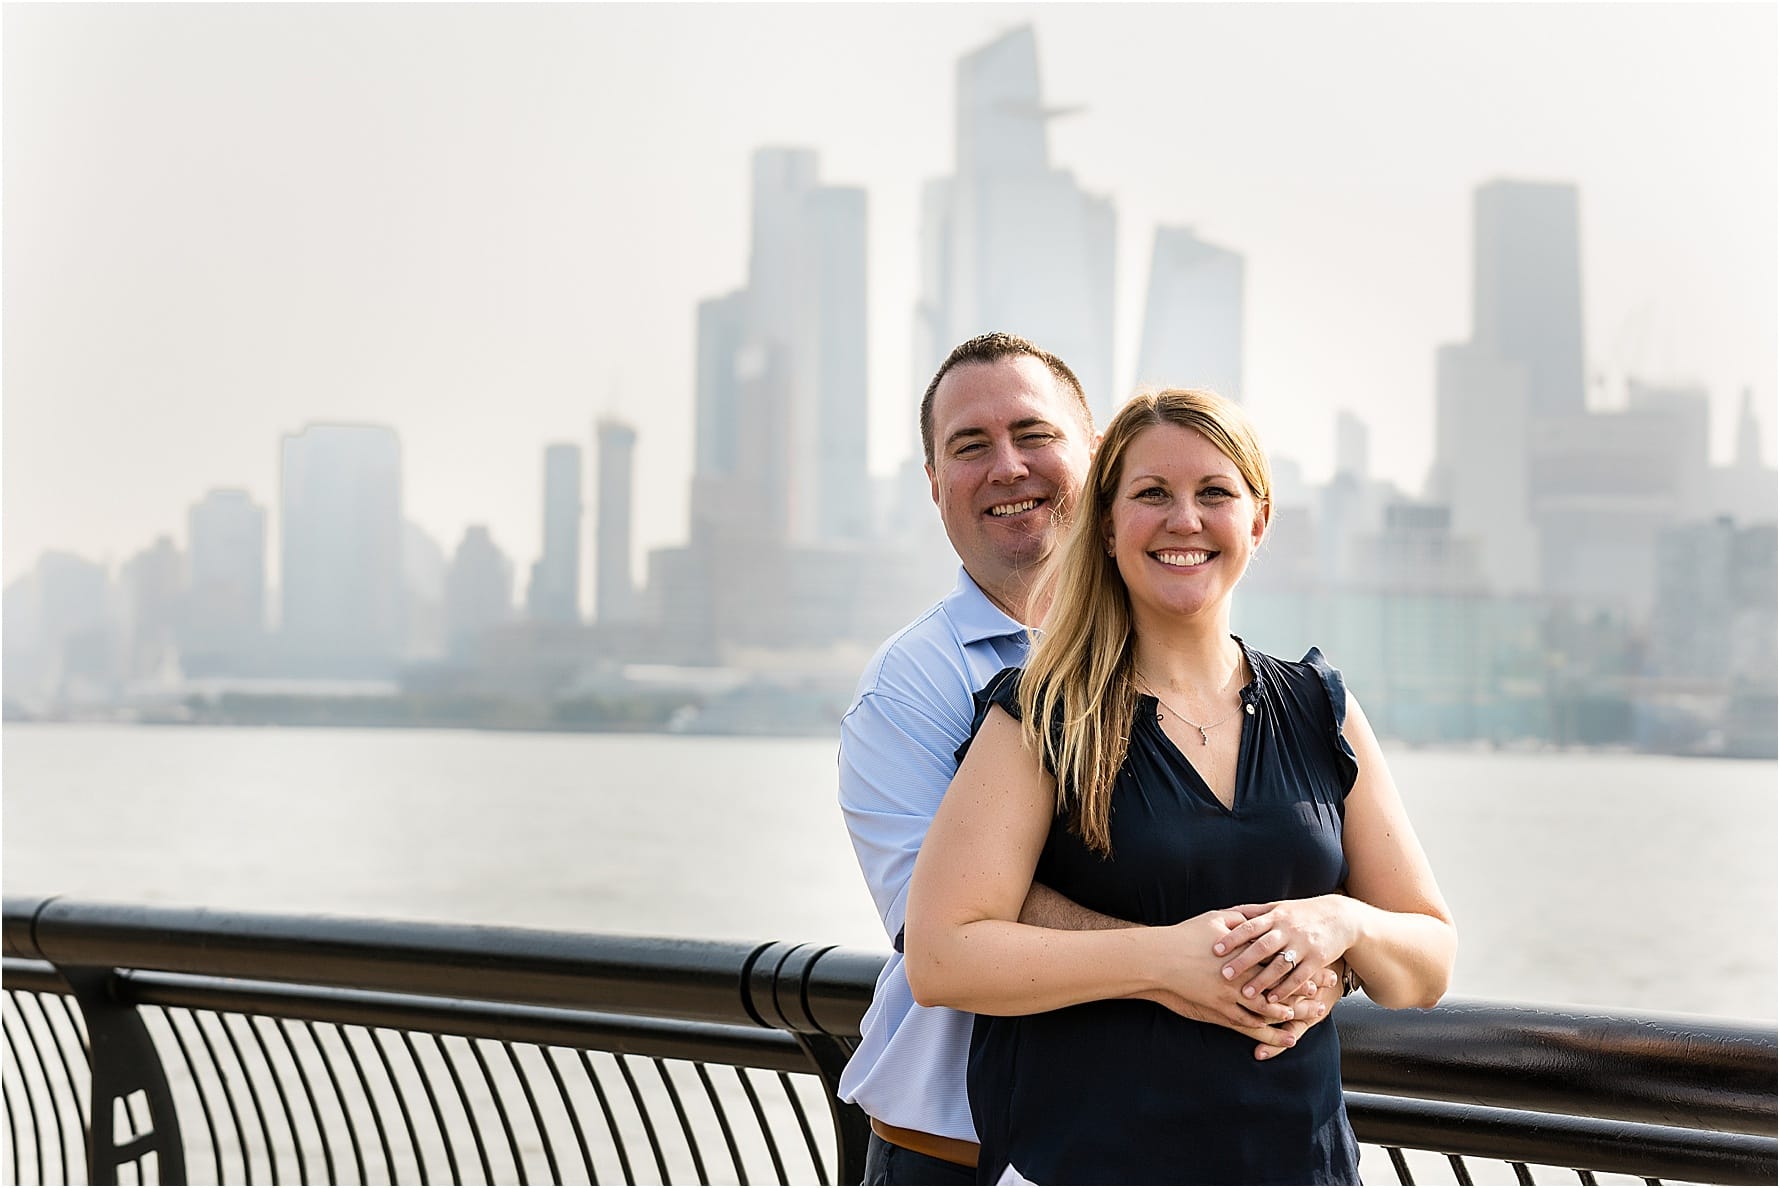 Groom holding the bride and smiling at the camera as they lean against a railing with the New York City skyline in the background